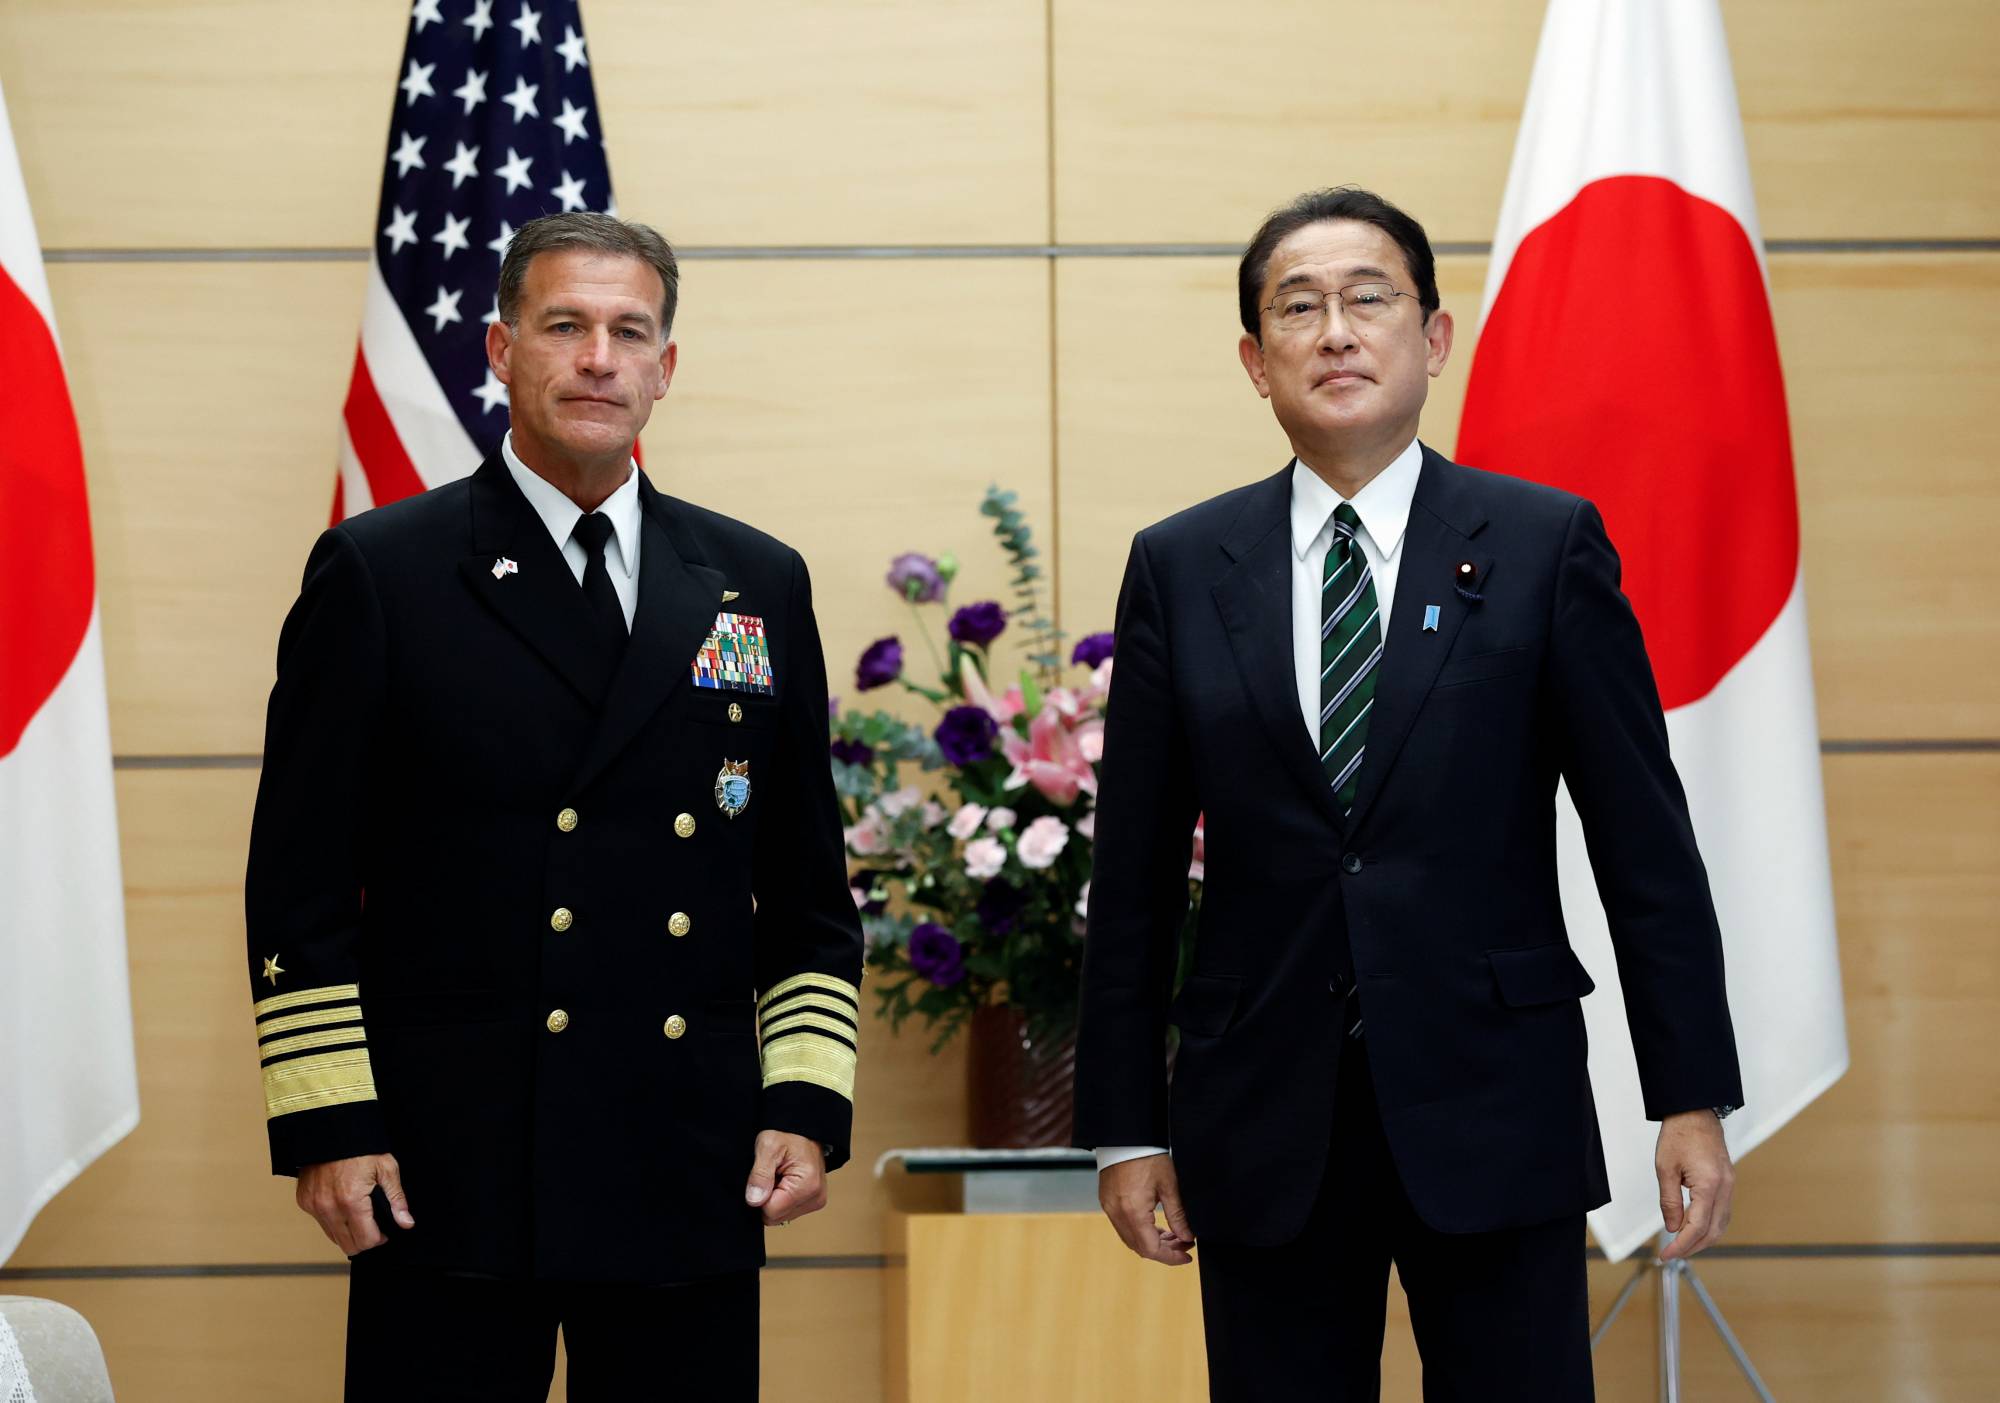 Prime Minister Fumio Kishida meets with Admiral John Aquilino, Commander of the United States Indo-Pacific Command, at the Prime Minister's Office in Tokyo on Thursday. | POOL / VIA REUTERS